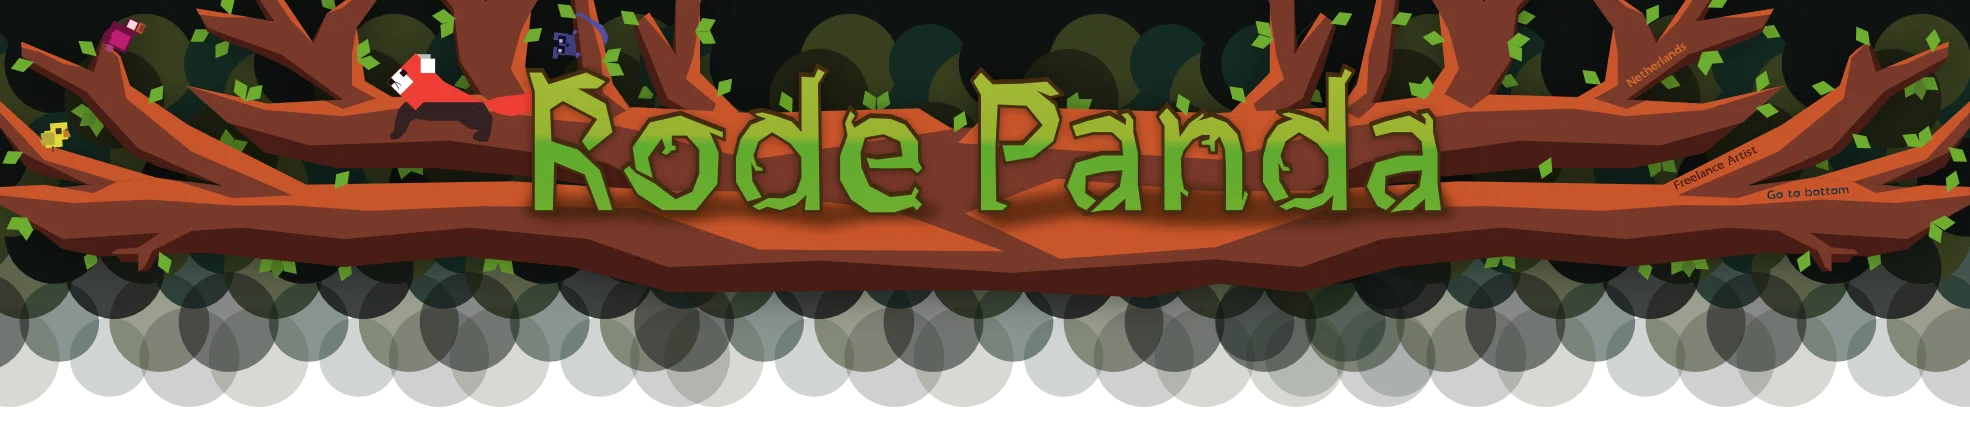 Website header for Rode Panda showing name and tree decorations.